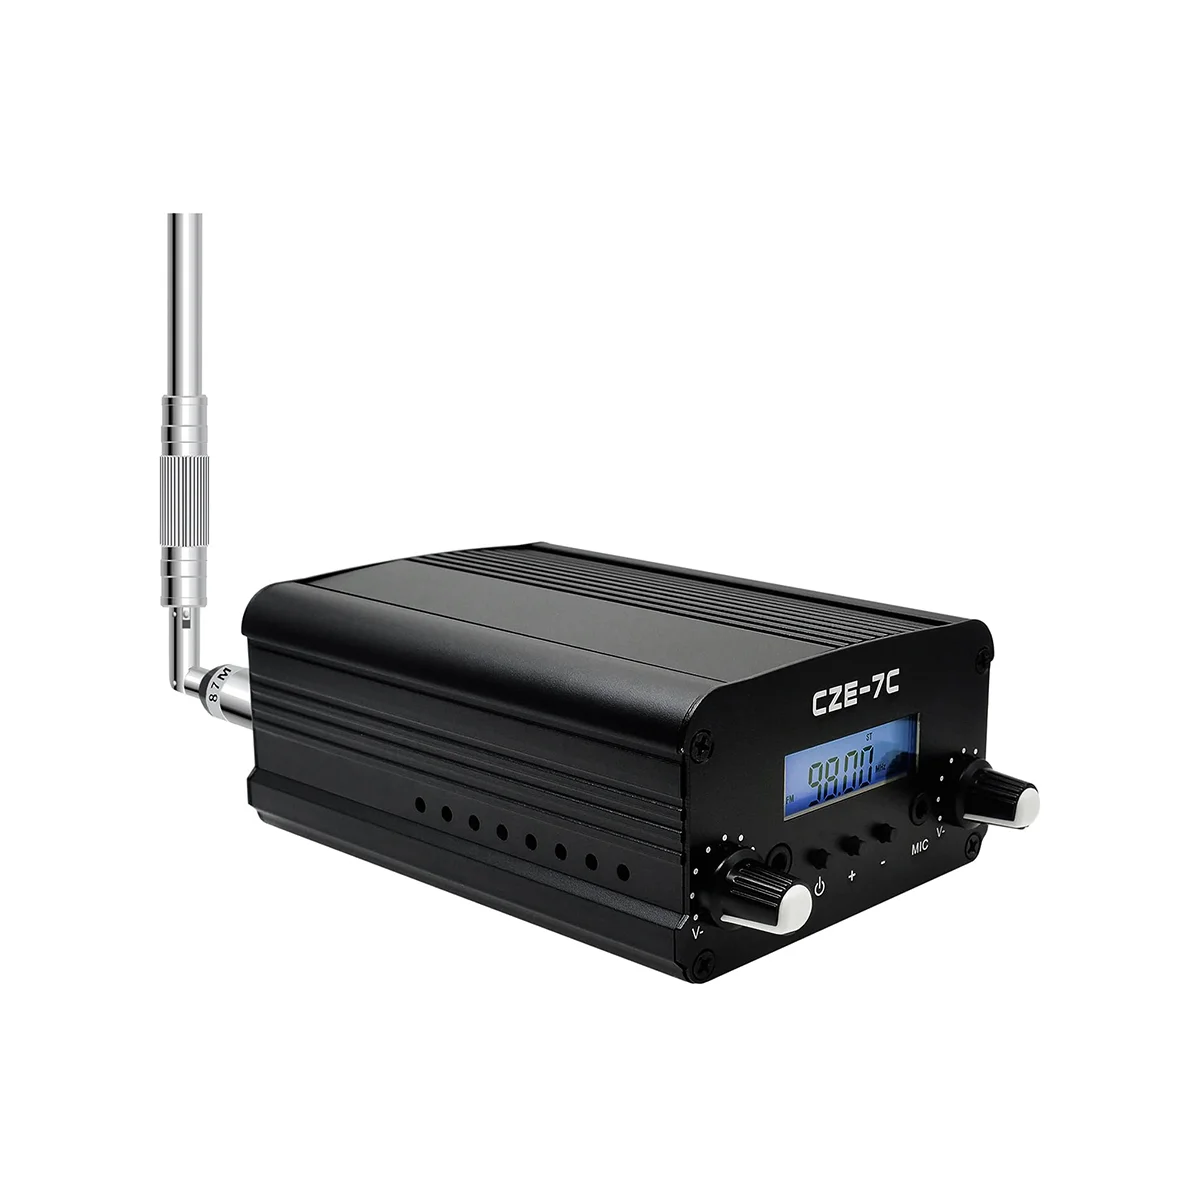 

CZE-7C 7W Long Range FM Transmitter for Drive-in Church, School & Supermarket Events, Light Shows Conference Stereo